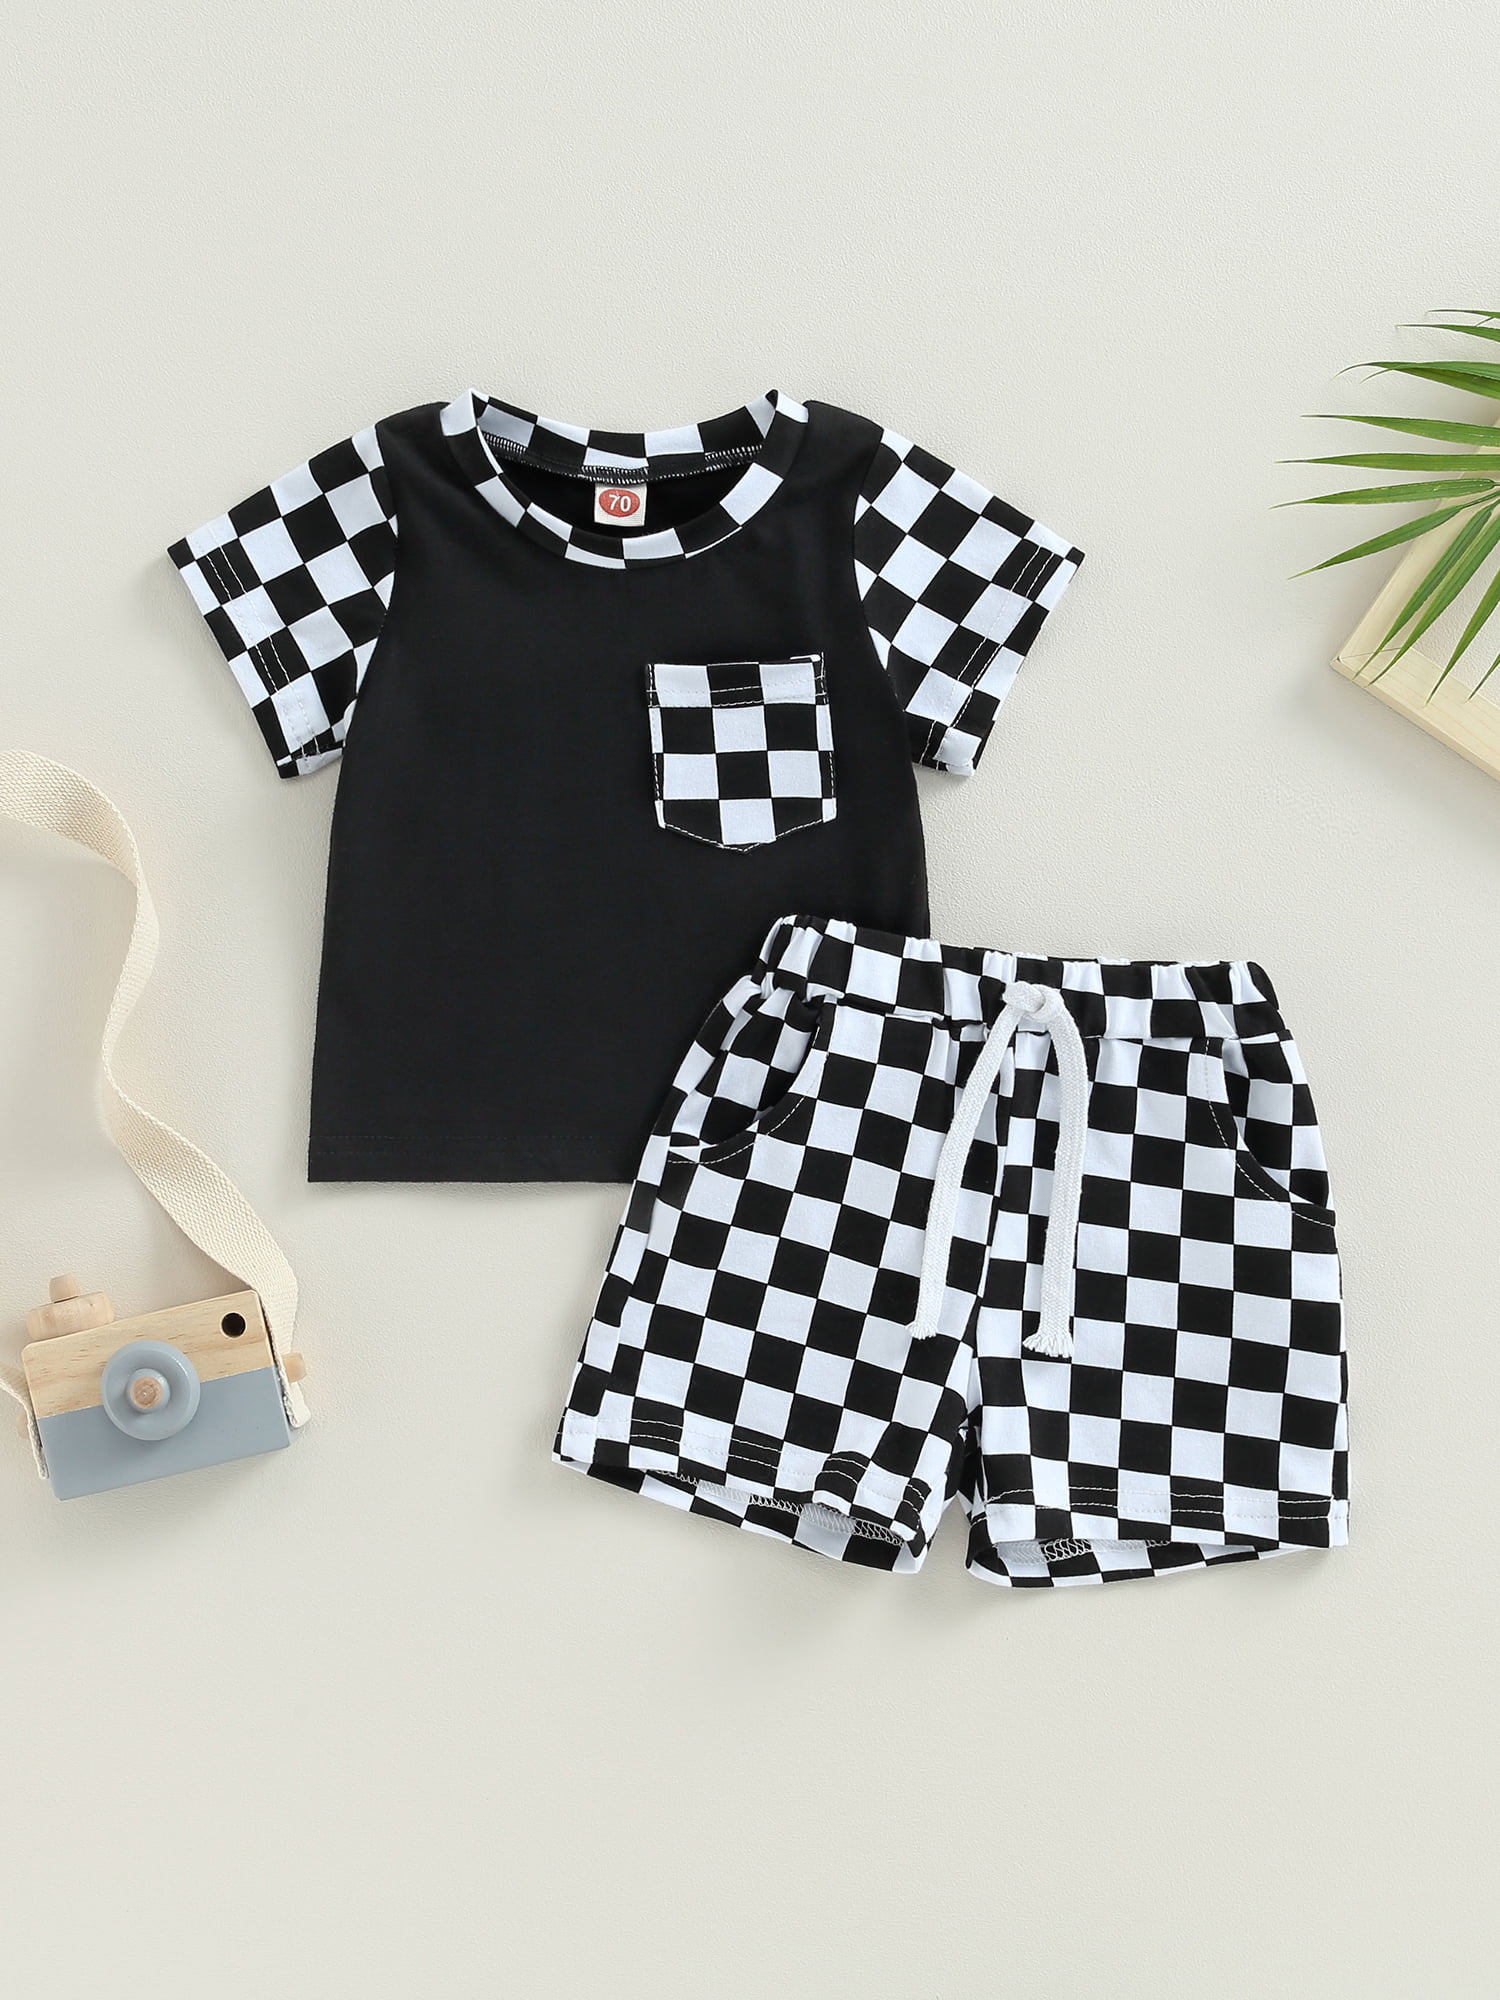 Jkerther Newborn Infant Boy Checkerboard Plaid Print Short Sleeve Button  Down Shirts and Shorts Outfits 